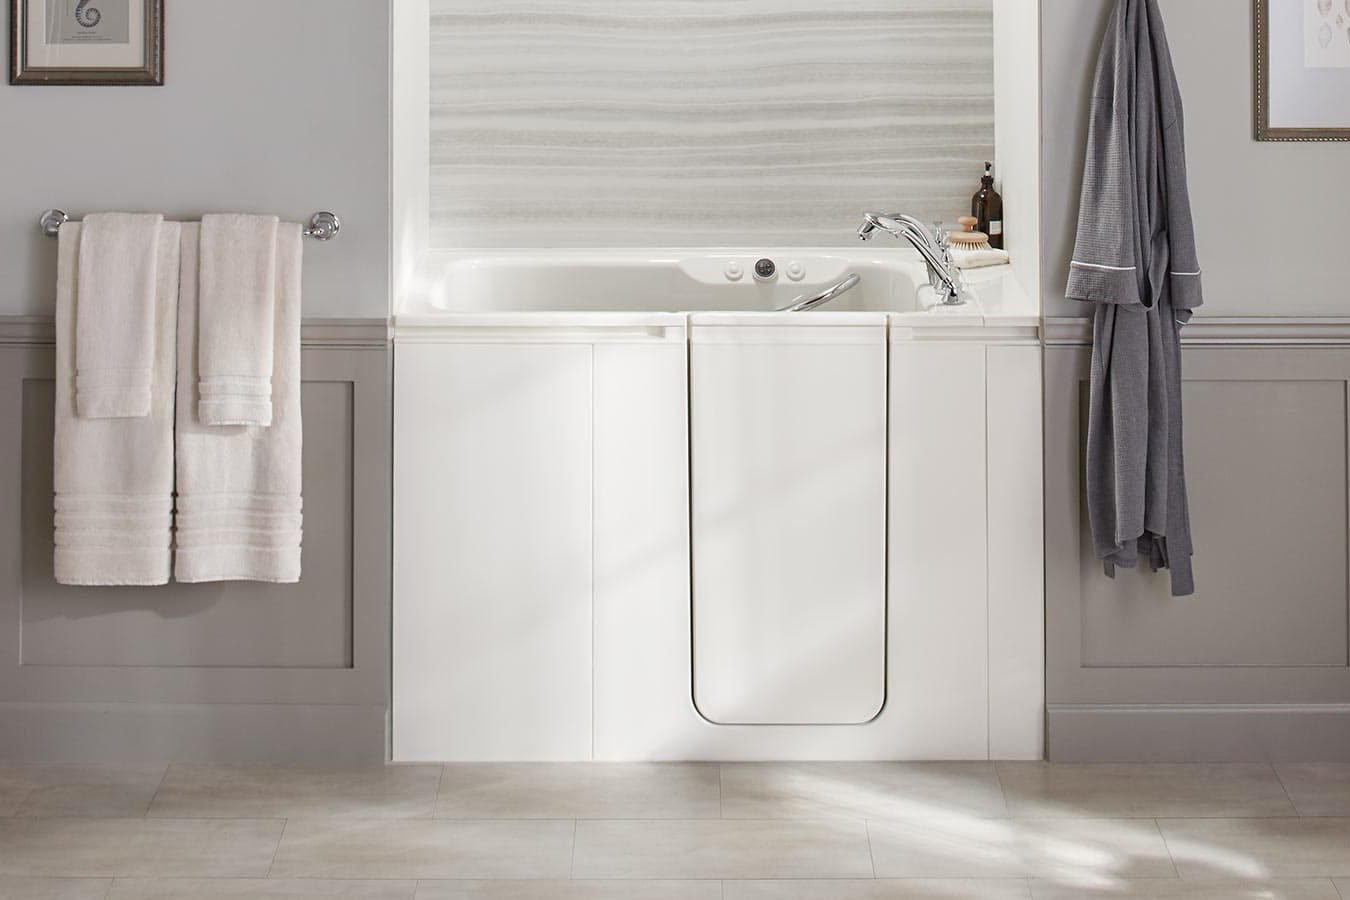 What To Know About Walk-In Tubs